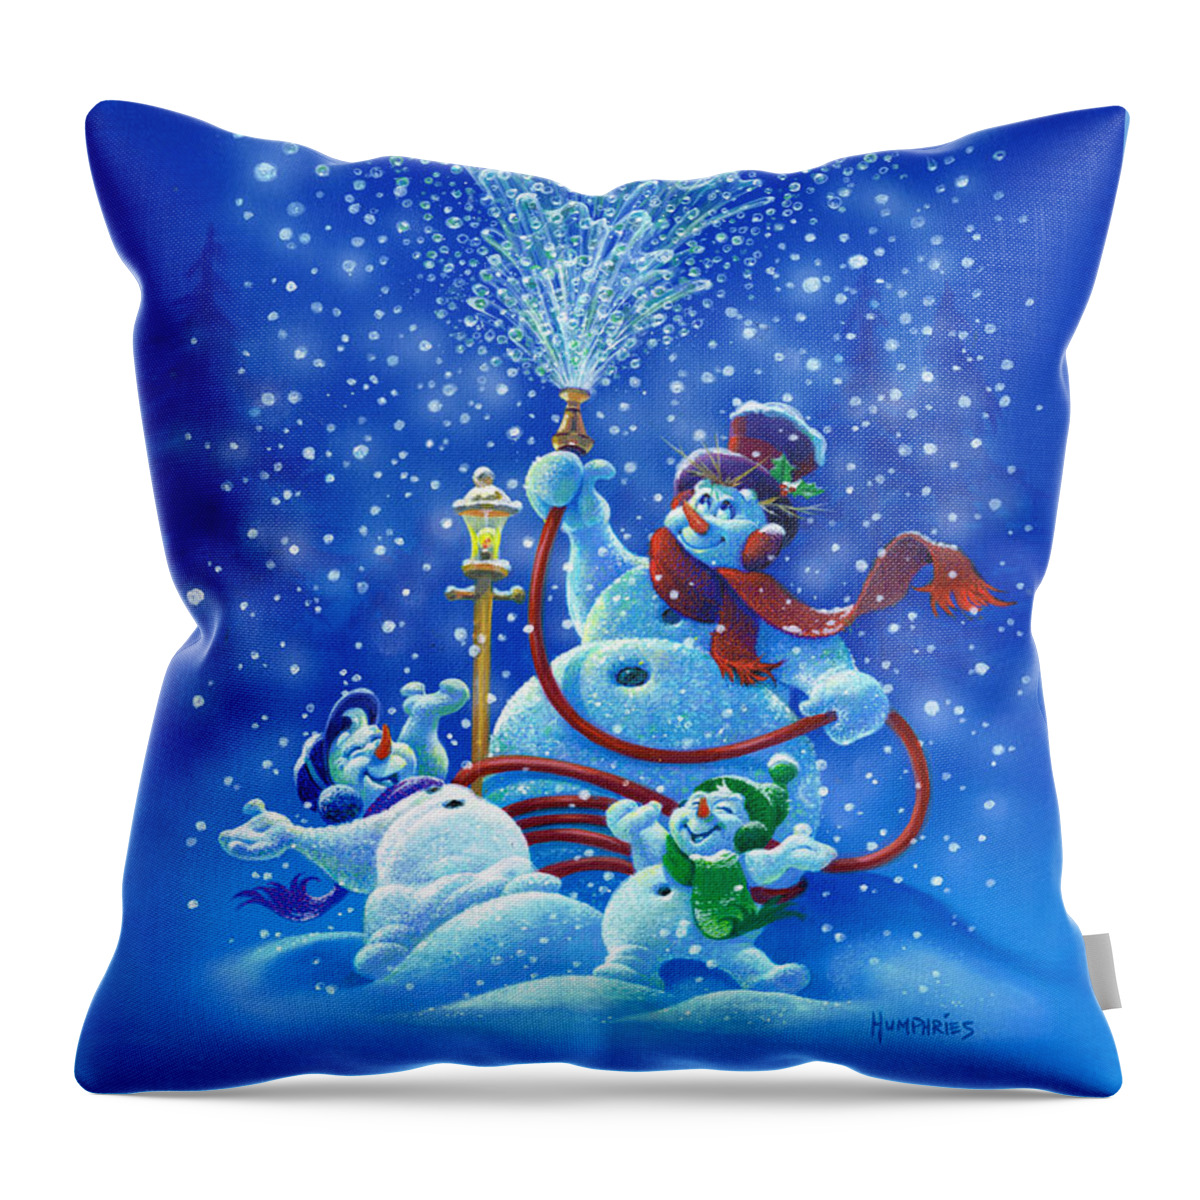 Michael Humphries Throw Pillow featuring the painting Making Snow by Michael Humphries